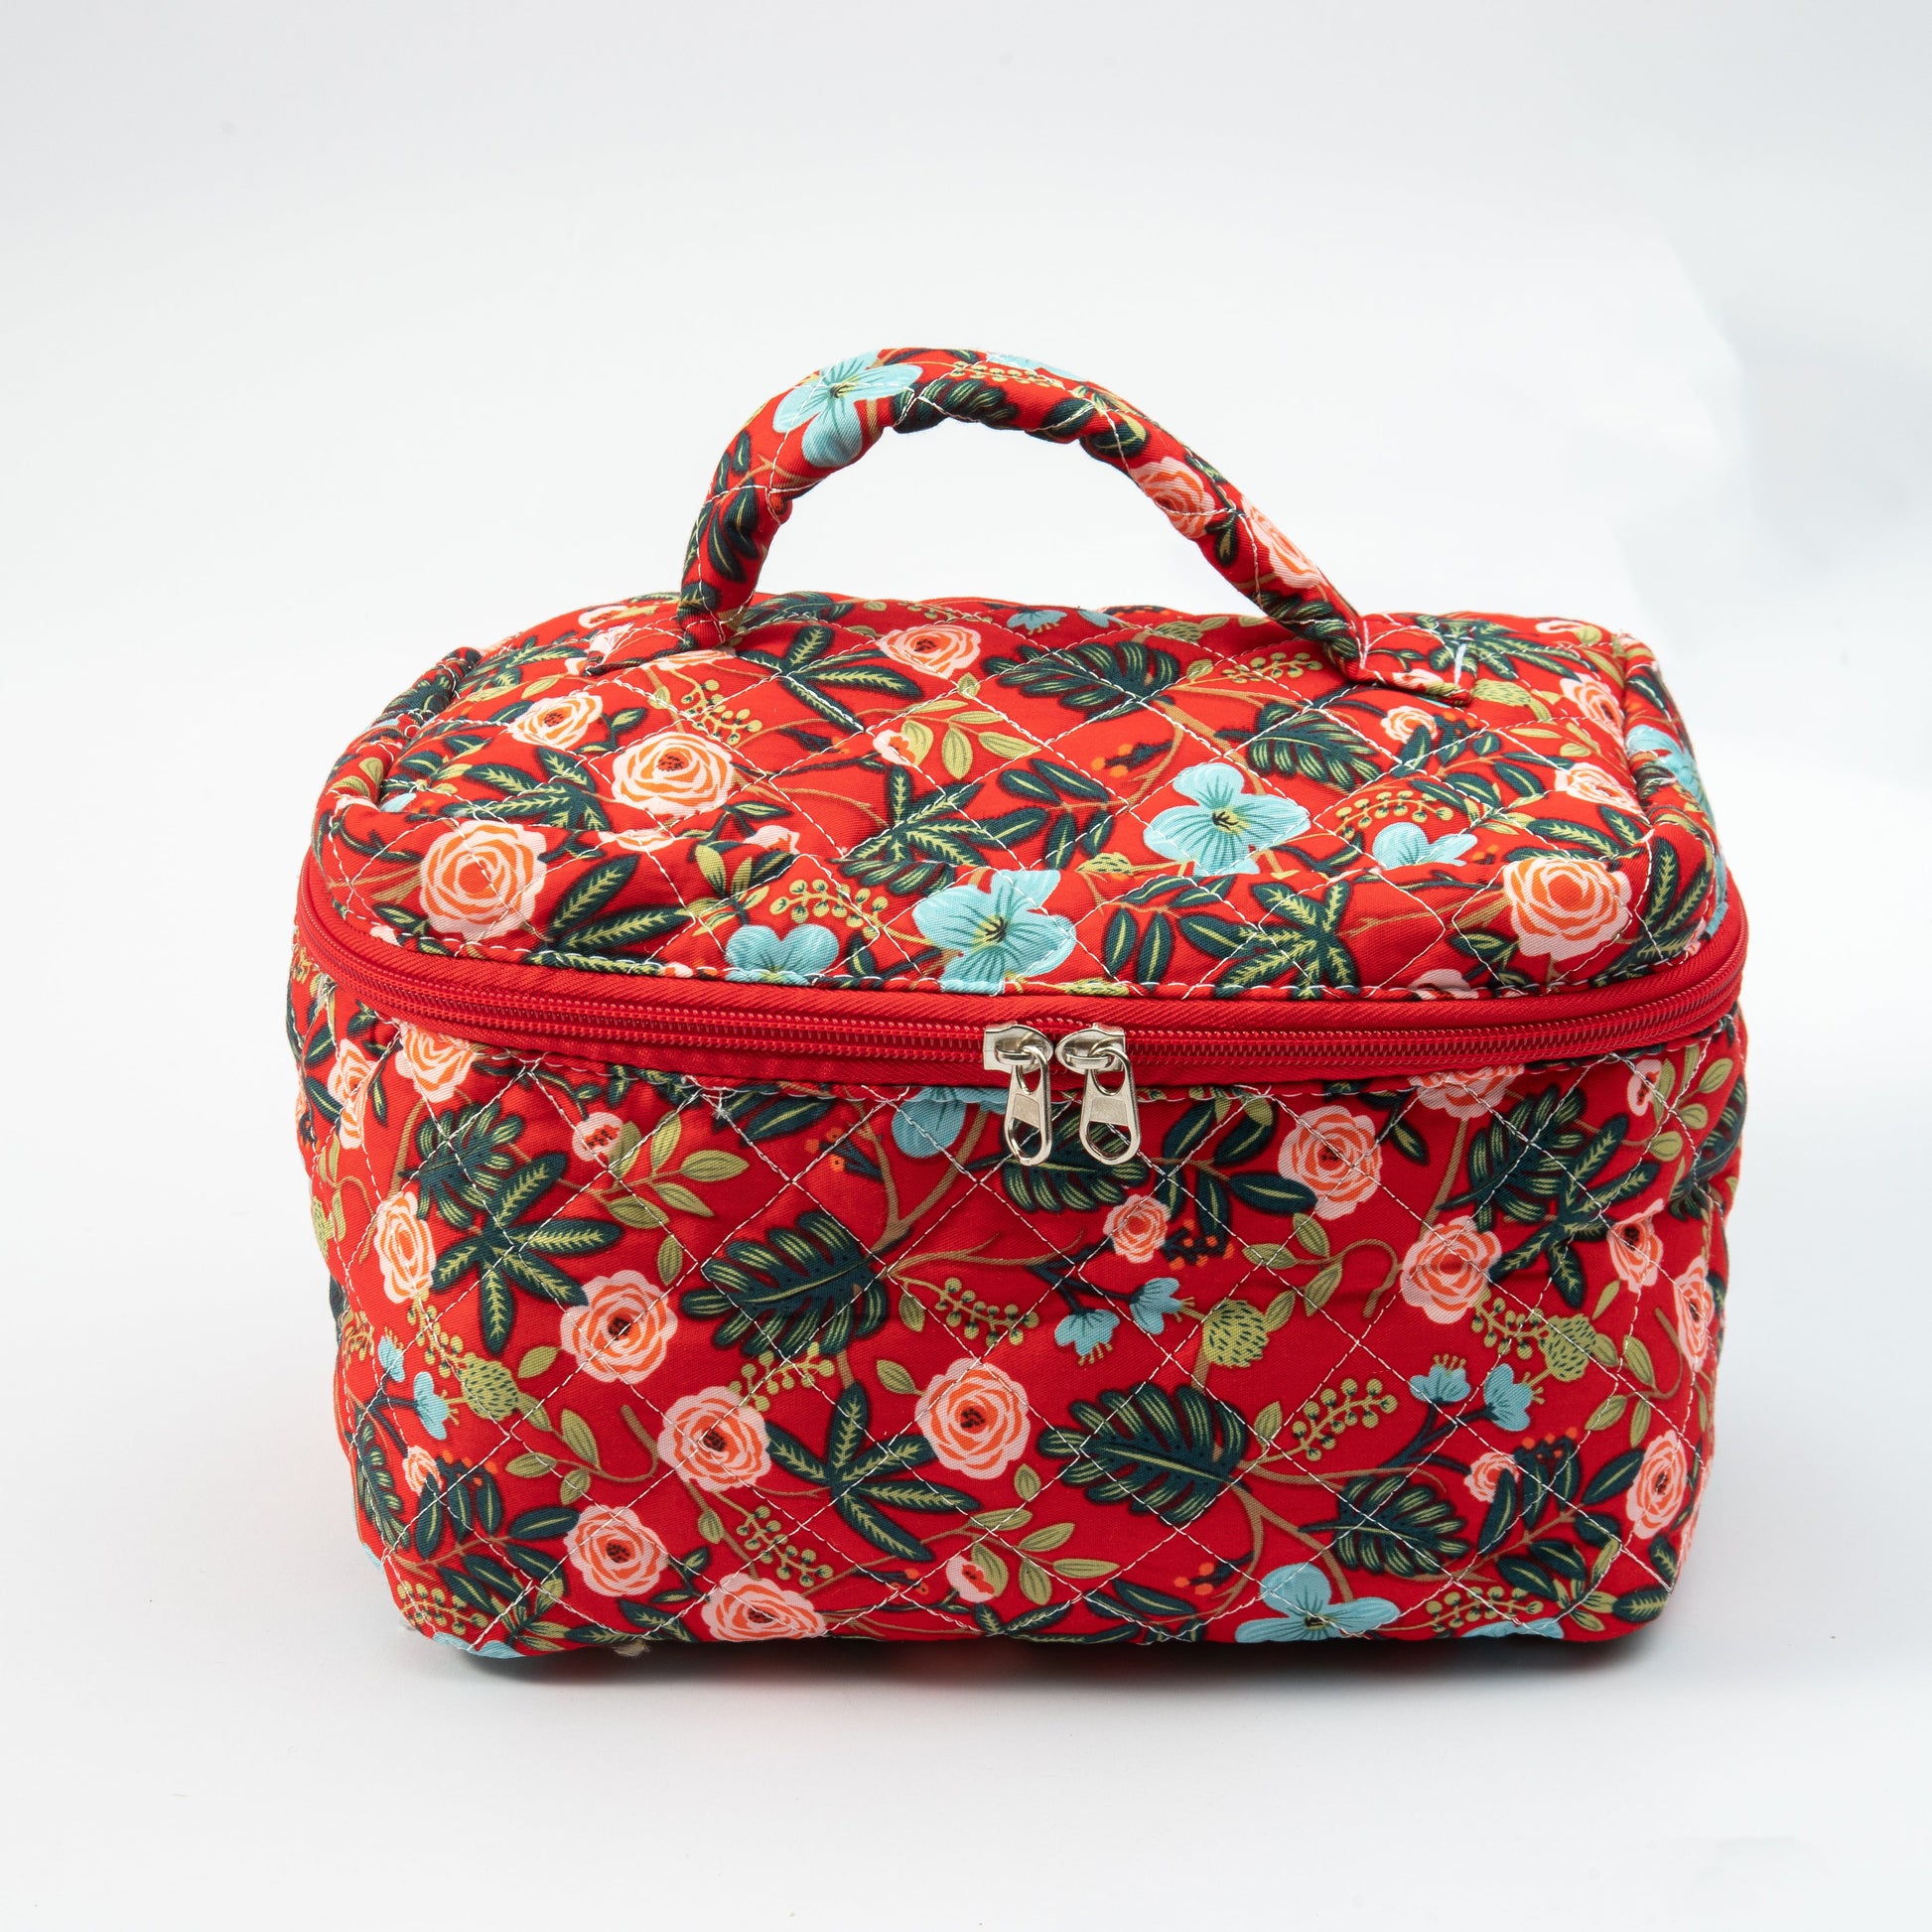 Small Cosmetic Bag With Floral Quilted Makeup Pouch - Travel